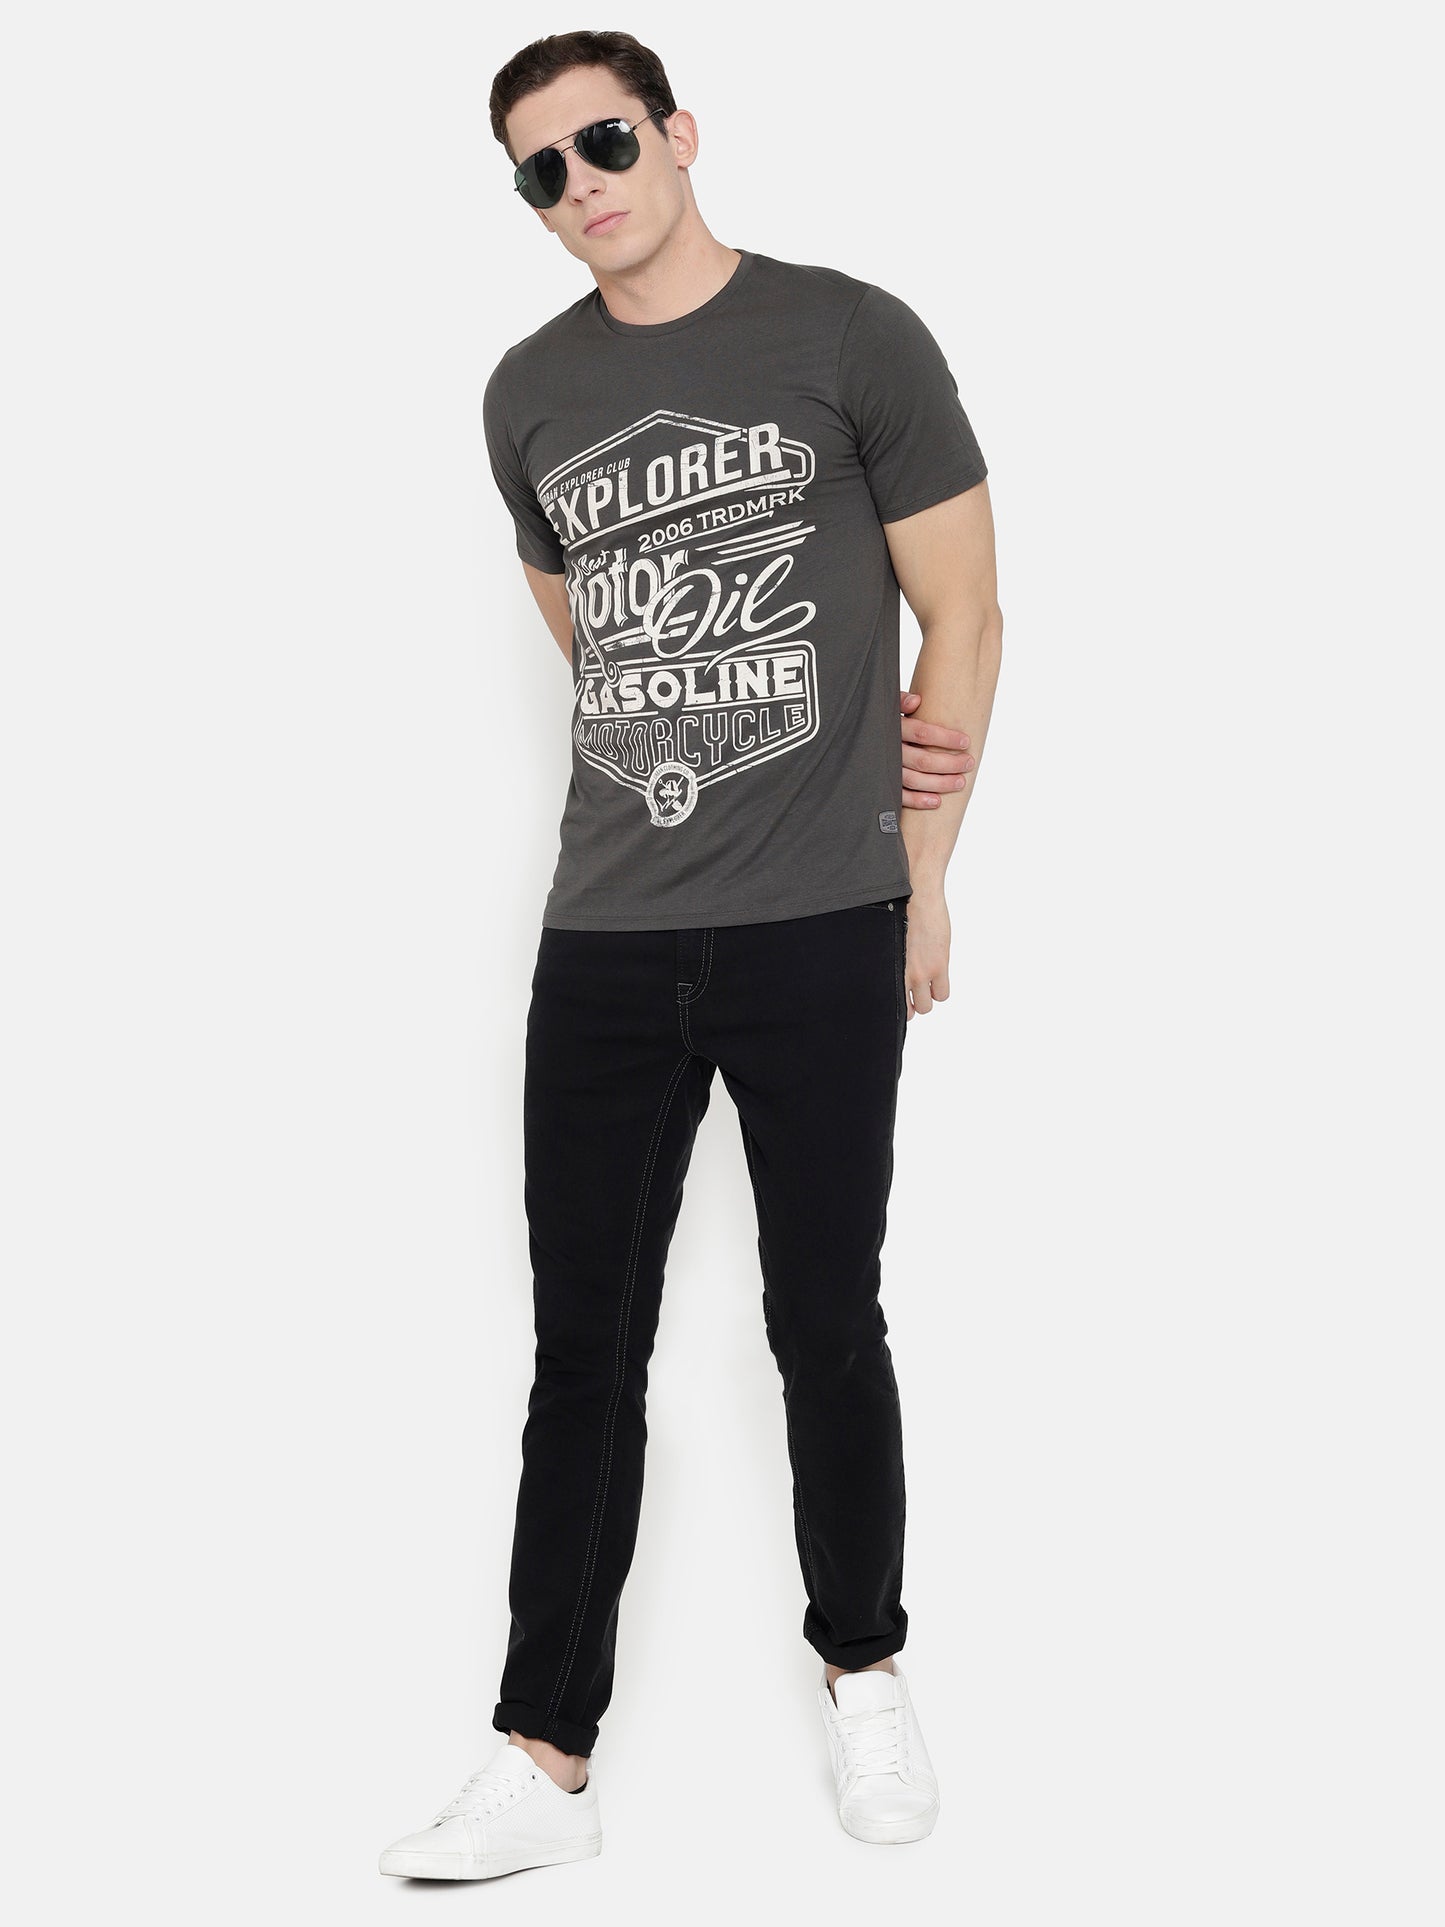 Charcoal Grey Chest Printed T-Shirt